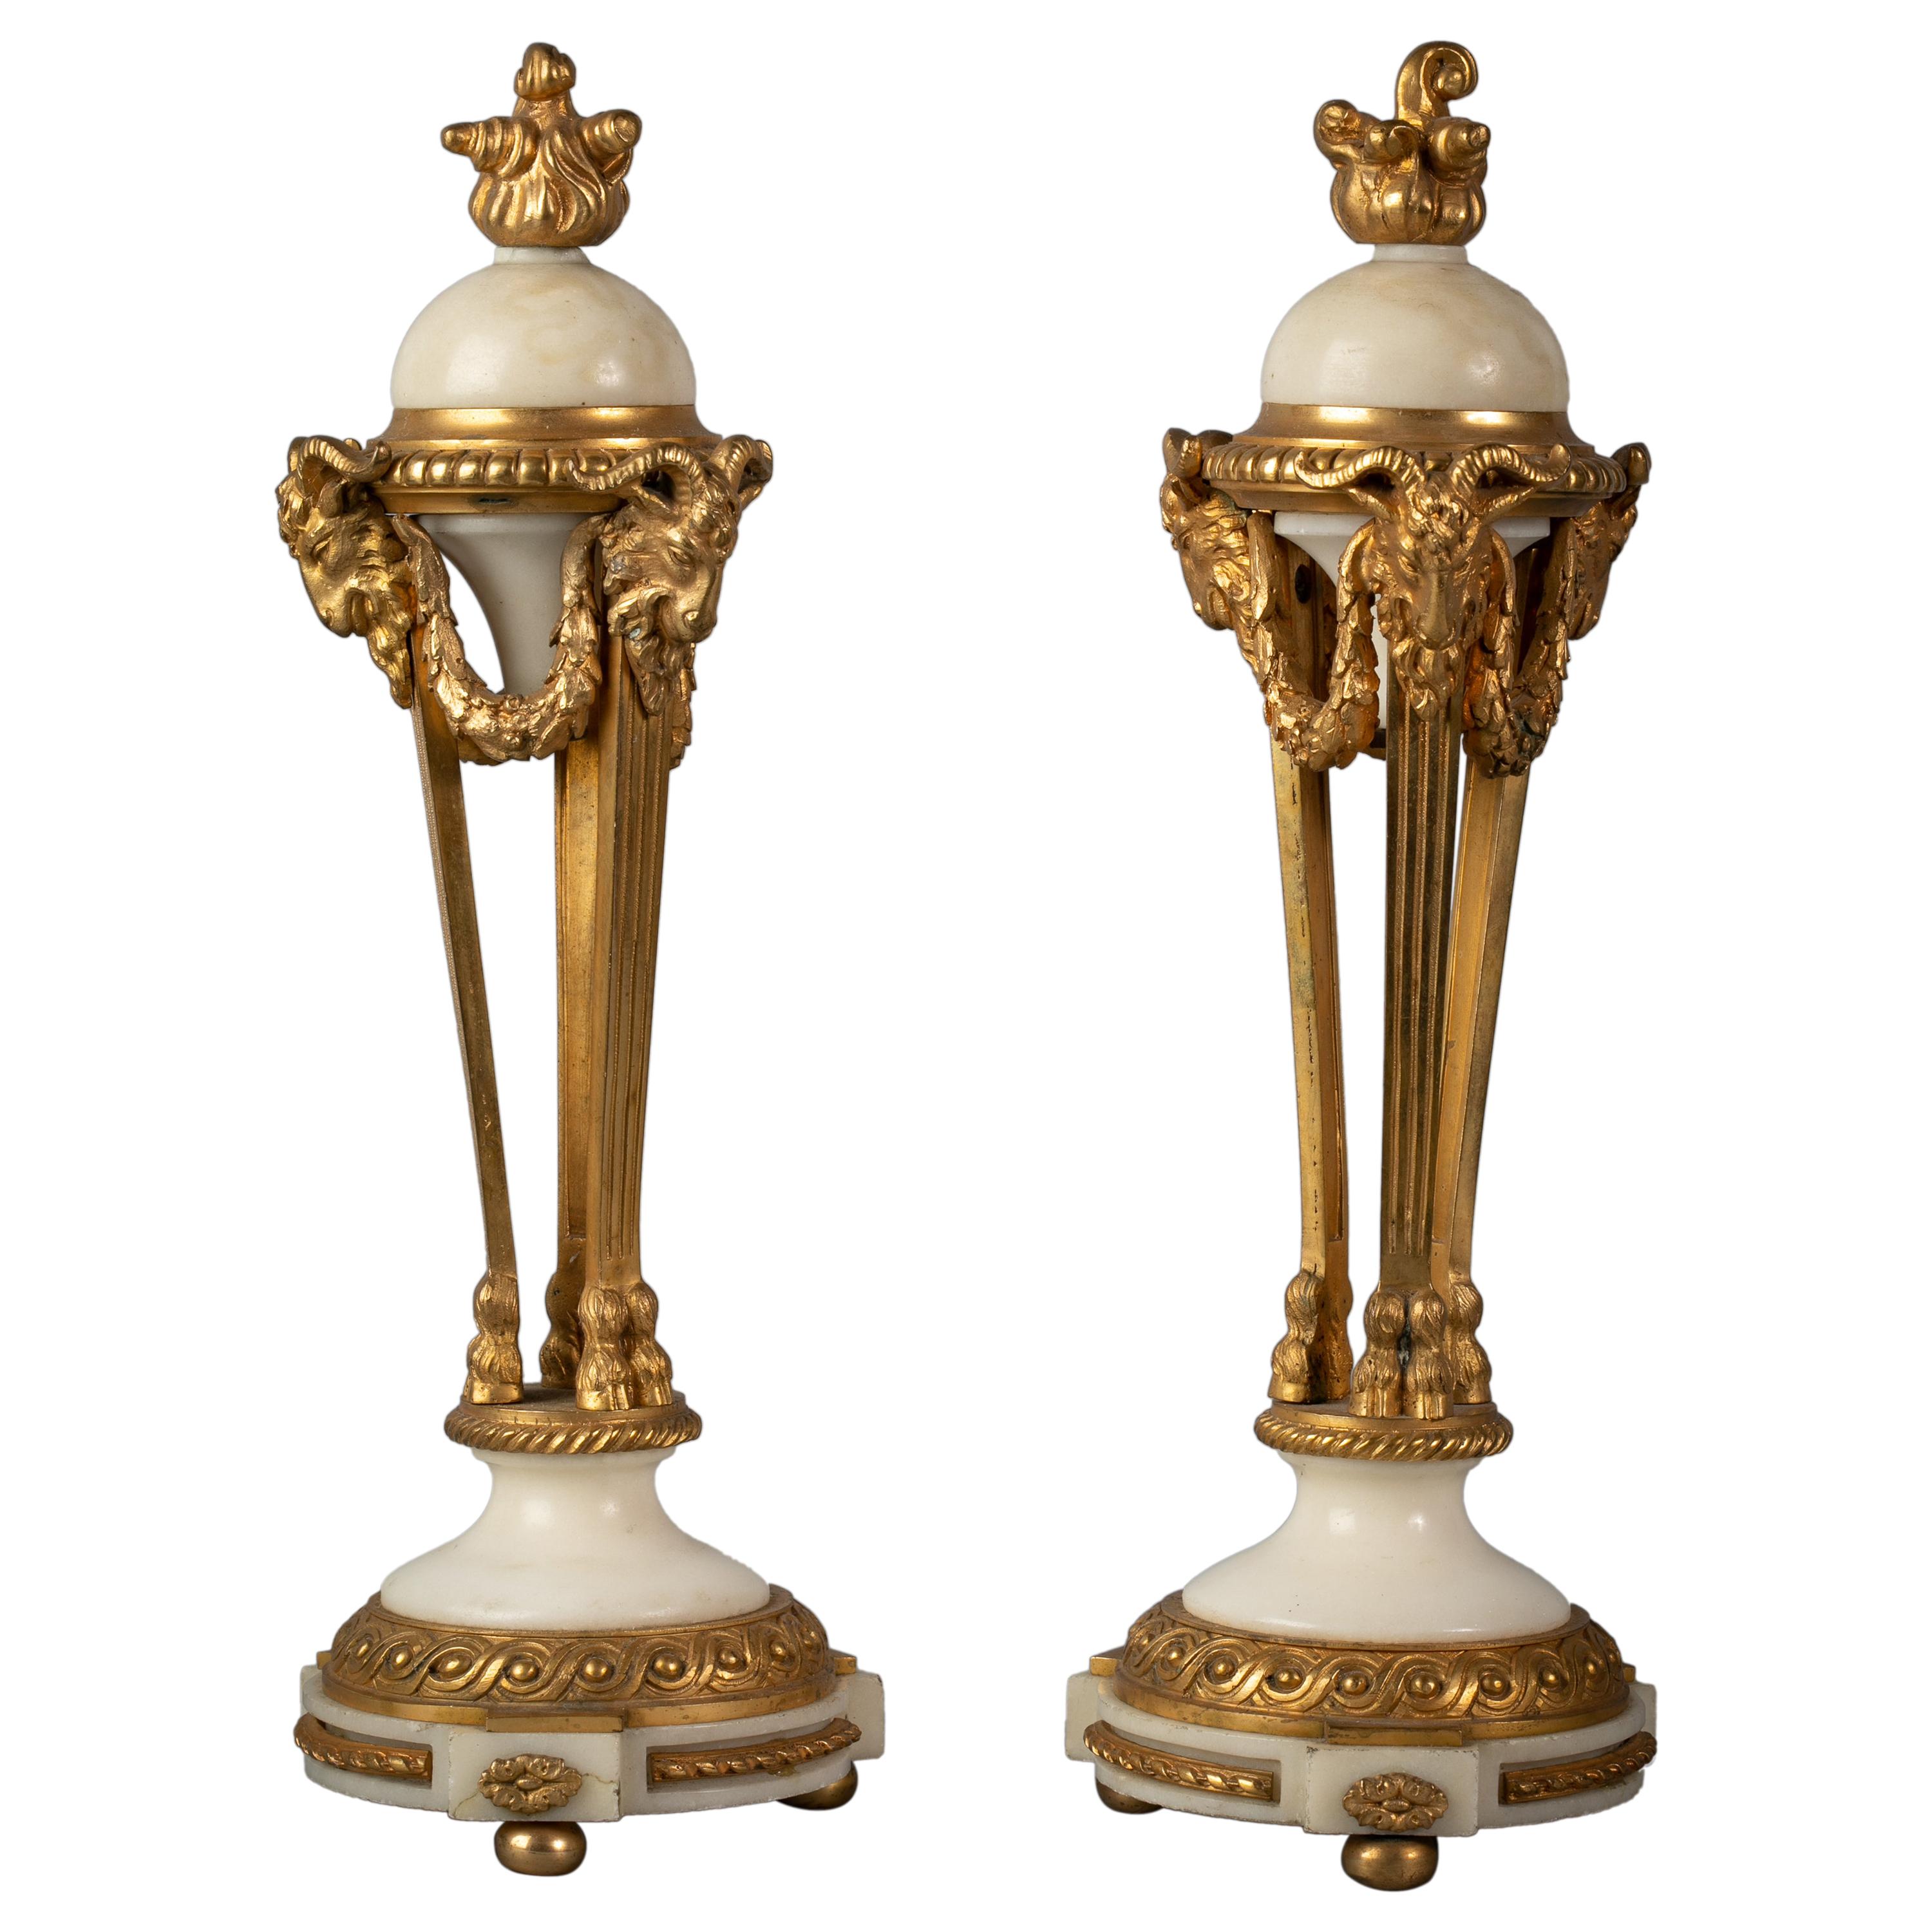 Pair of French Gilt Bronze and Marble Covered Urns, circa 1875 For Sale